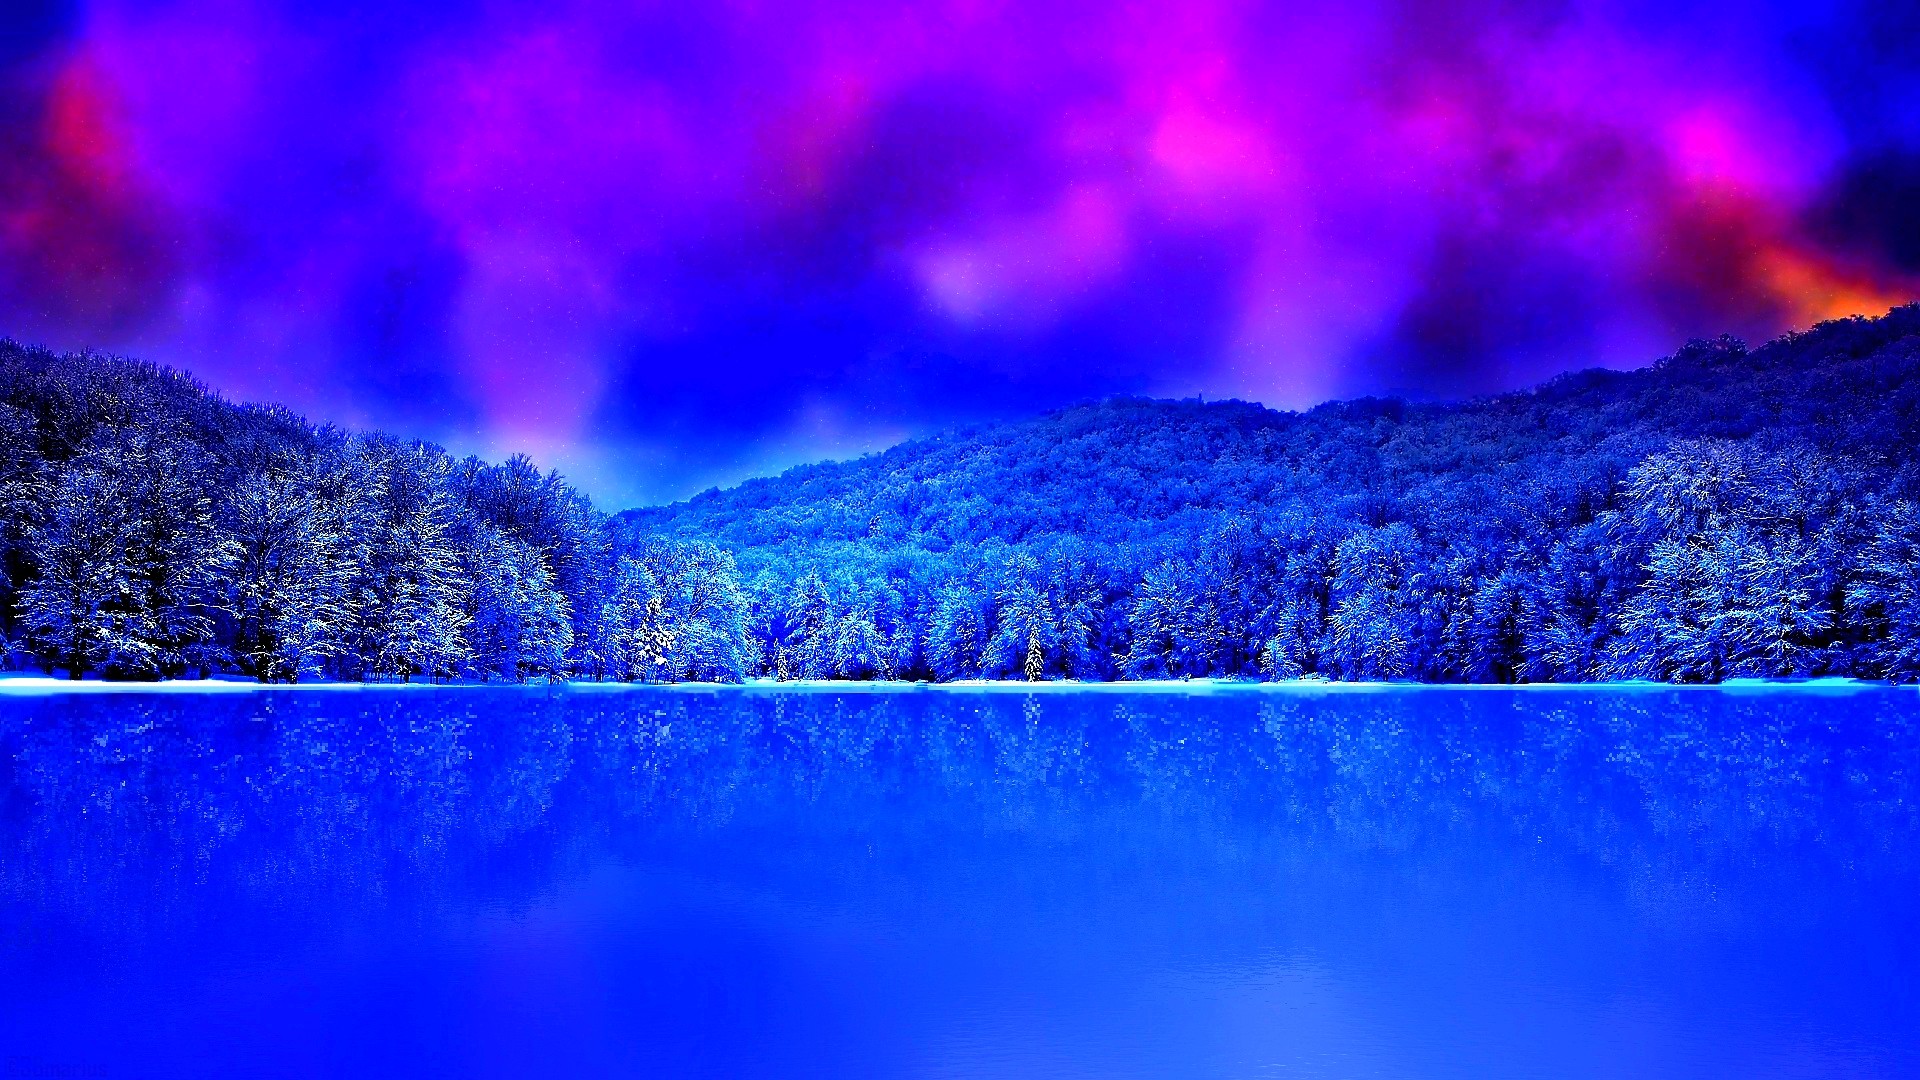 Download A Purple And Blue Background With A Mountain And Mountains